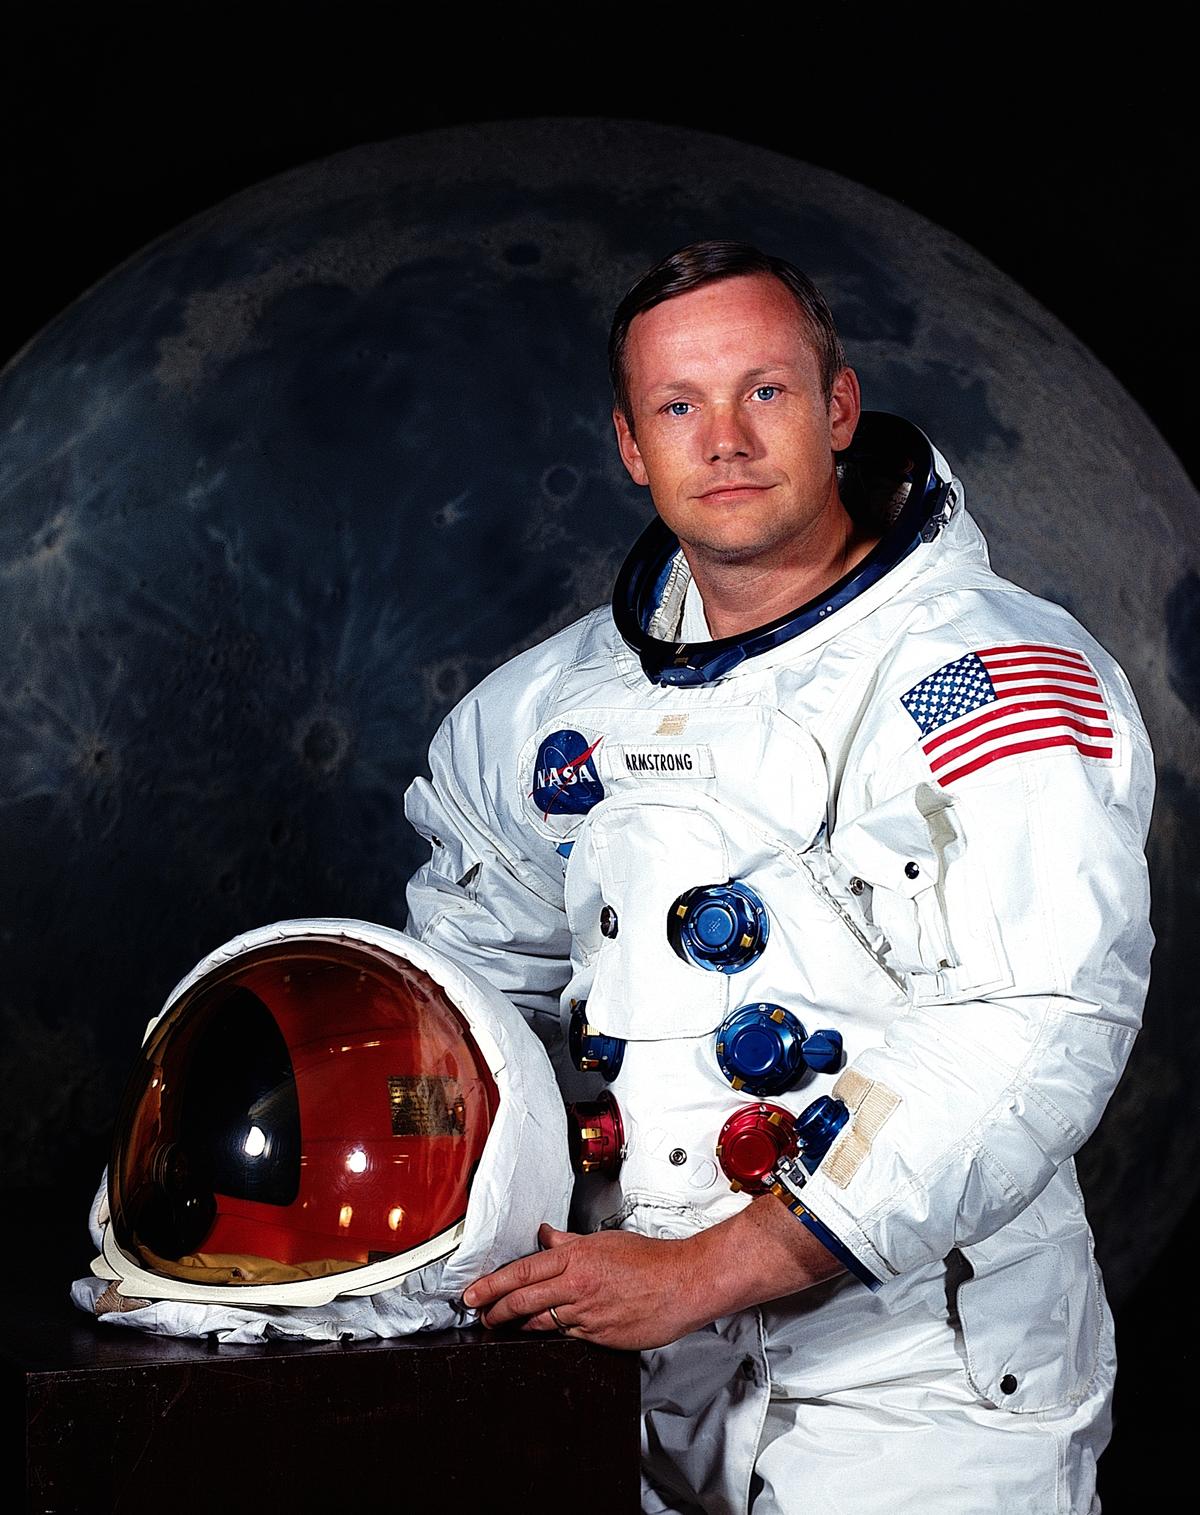 Astronaut Neil A. Armstrong poses for a portrait July 1969. (NASA/Newsmakers)